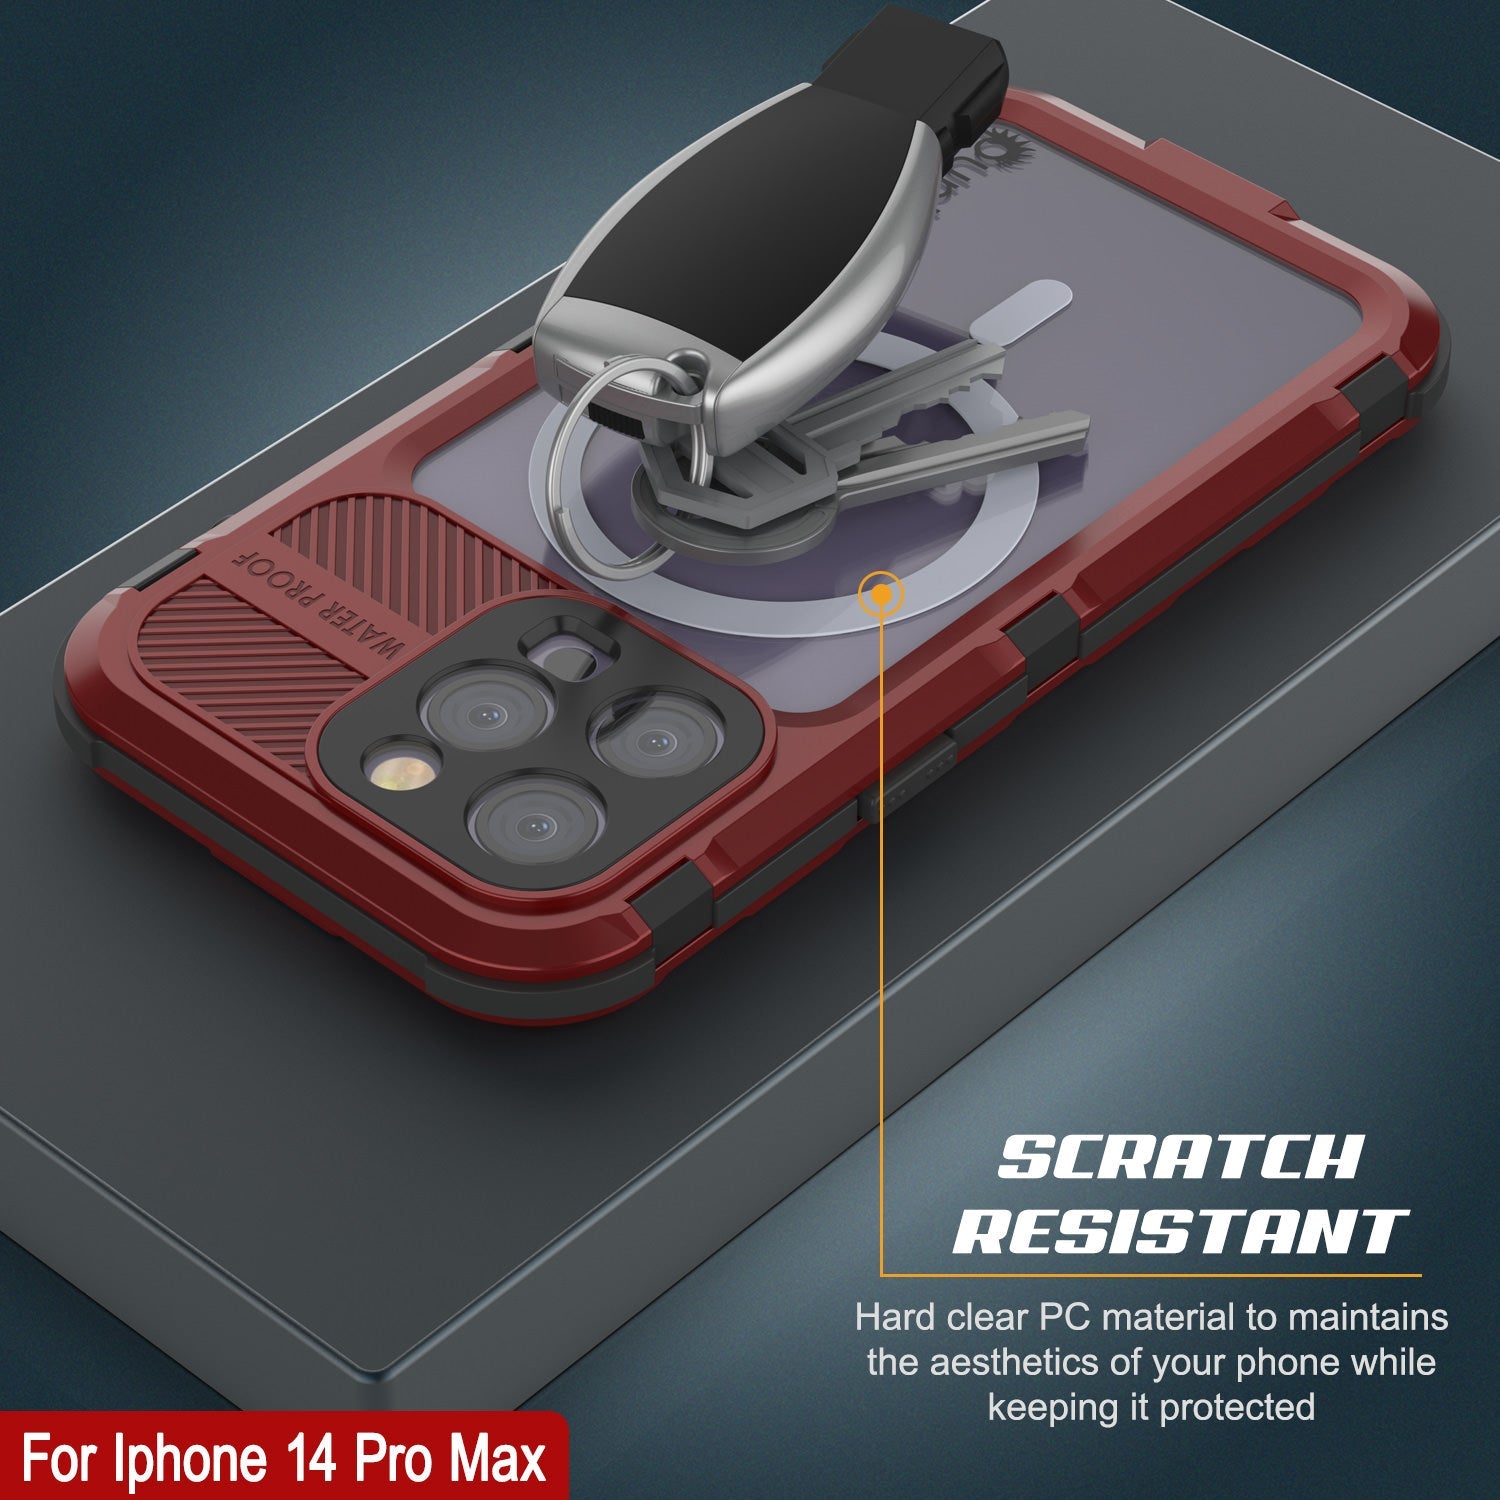 iPhone 14 Pro Max Metal Extreme 2.0 Series Aluminum Waterproof Case IP68 W/Buillt in Screen Protector [Red-Black]